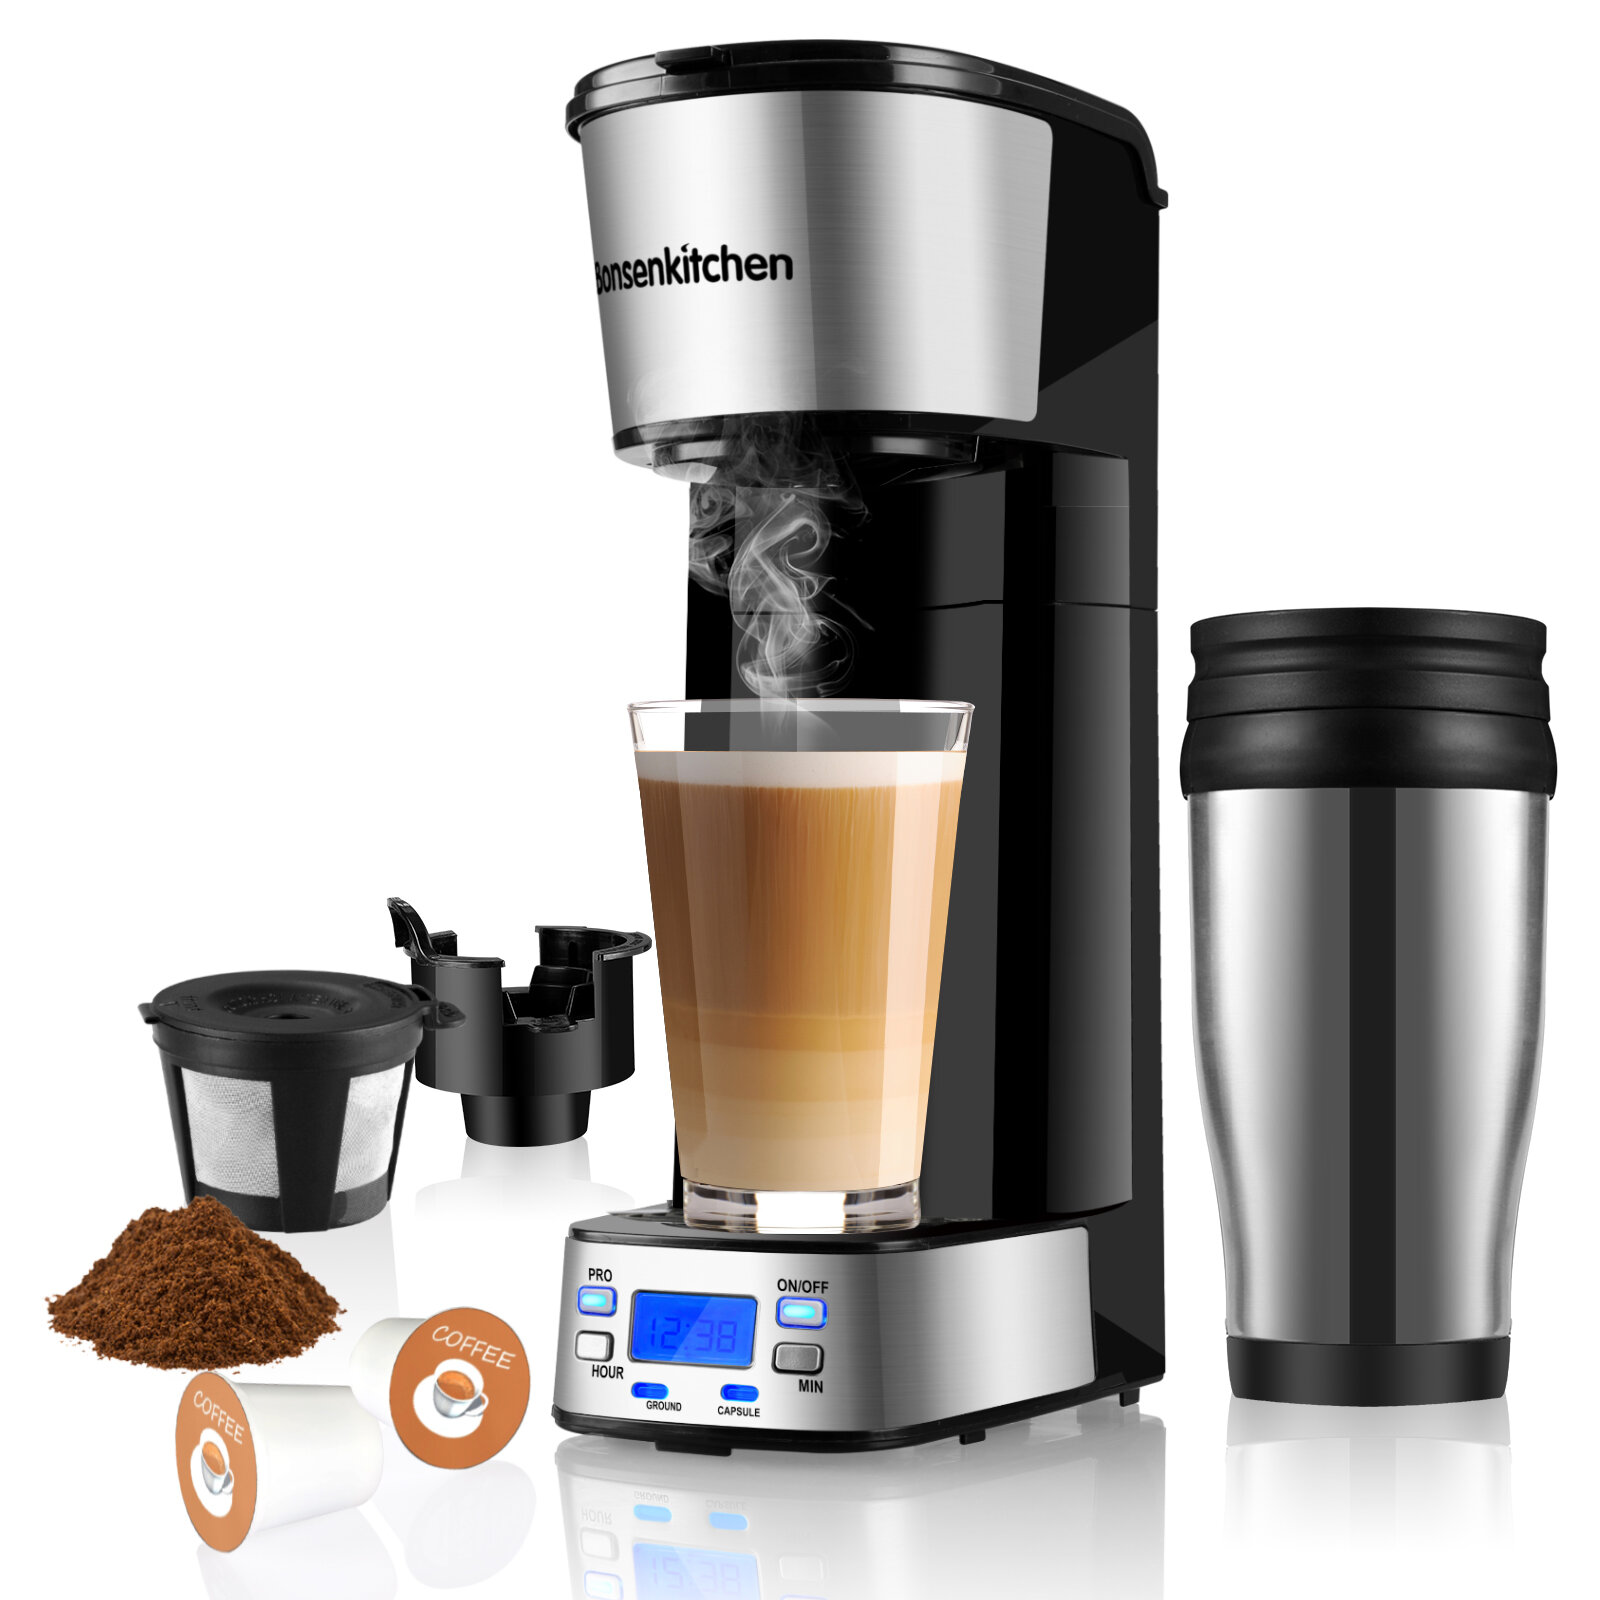 Bonsenkitchen 2-In-1 Single Serve Coffee Maker With Milk Frother